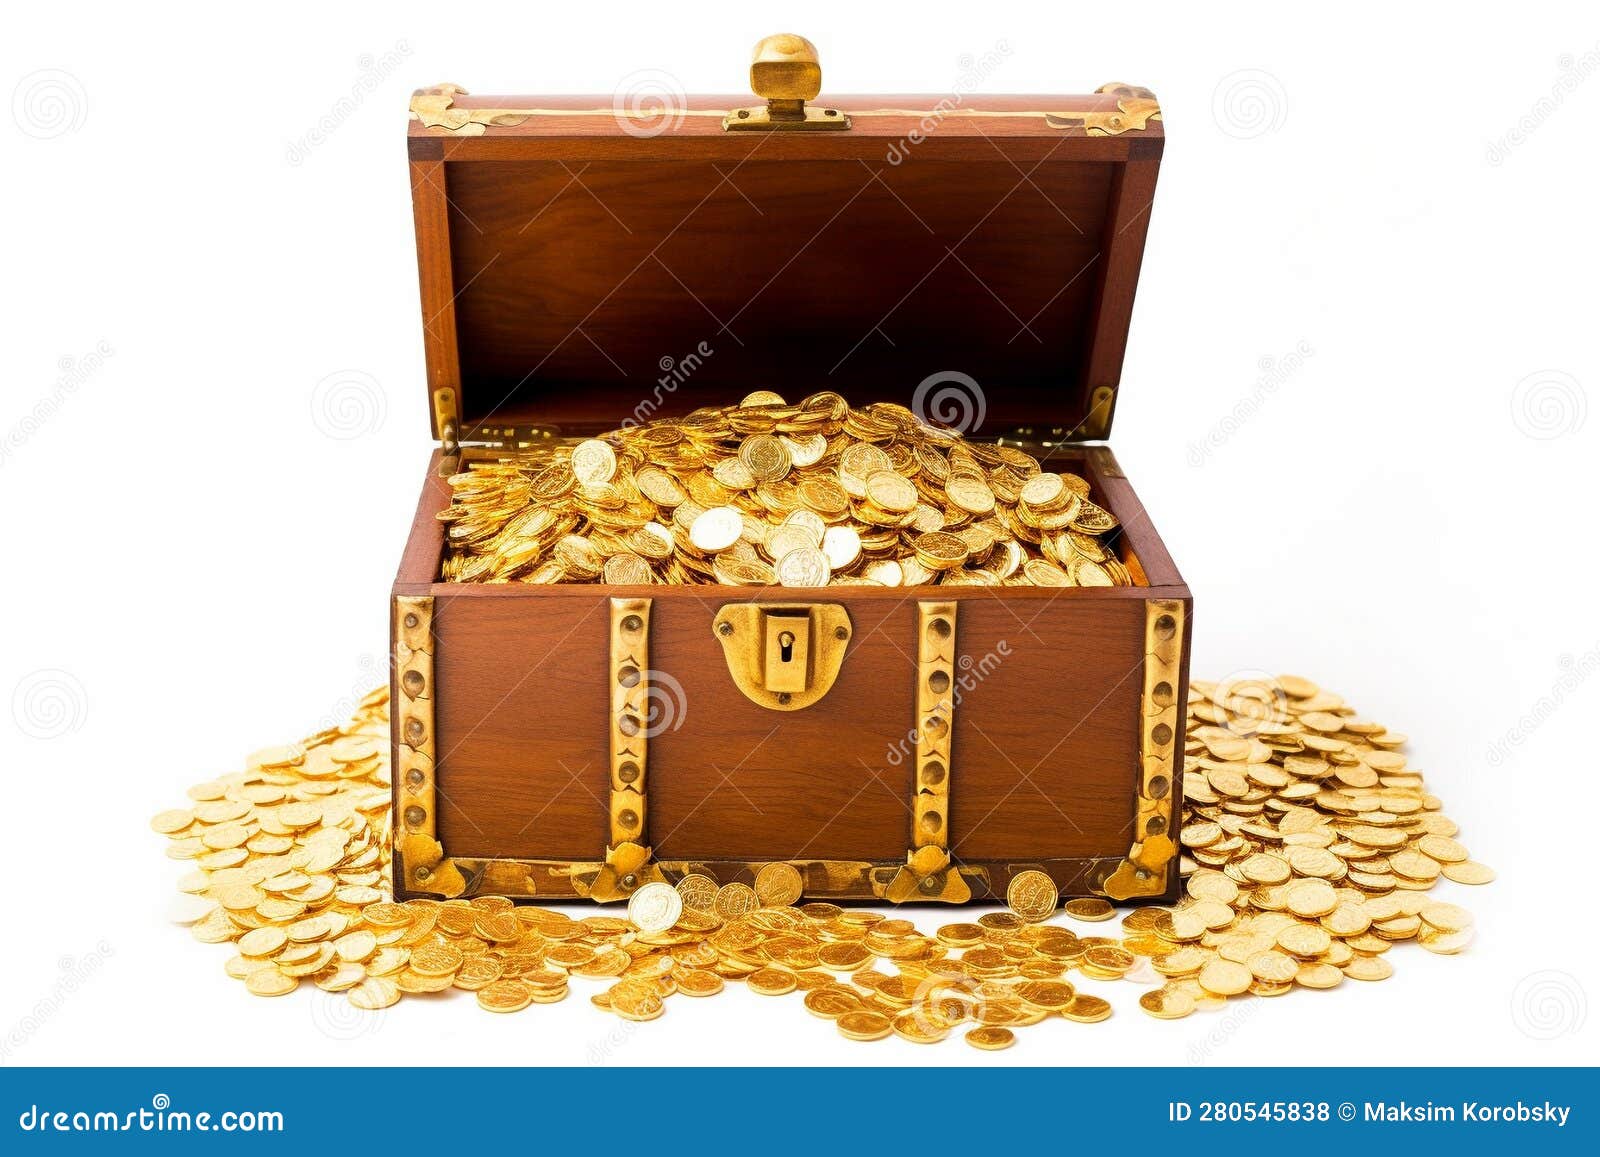 https://thumbs.dreamstime.com/z/open-treasure-chest-overflowing-gold-coins-isolated-white-high-quality-photo-280545838.jpg